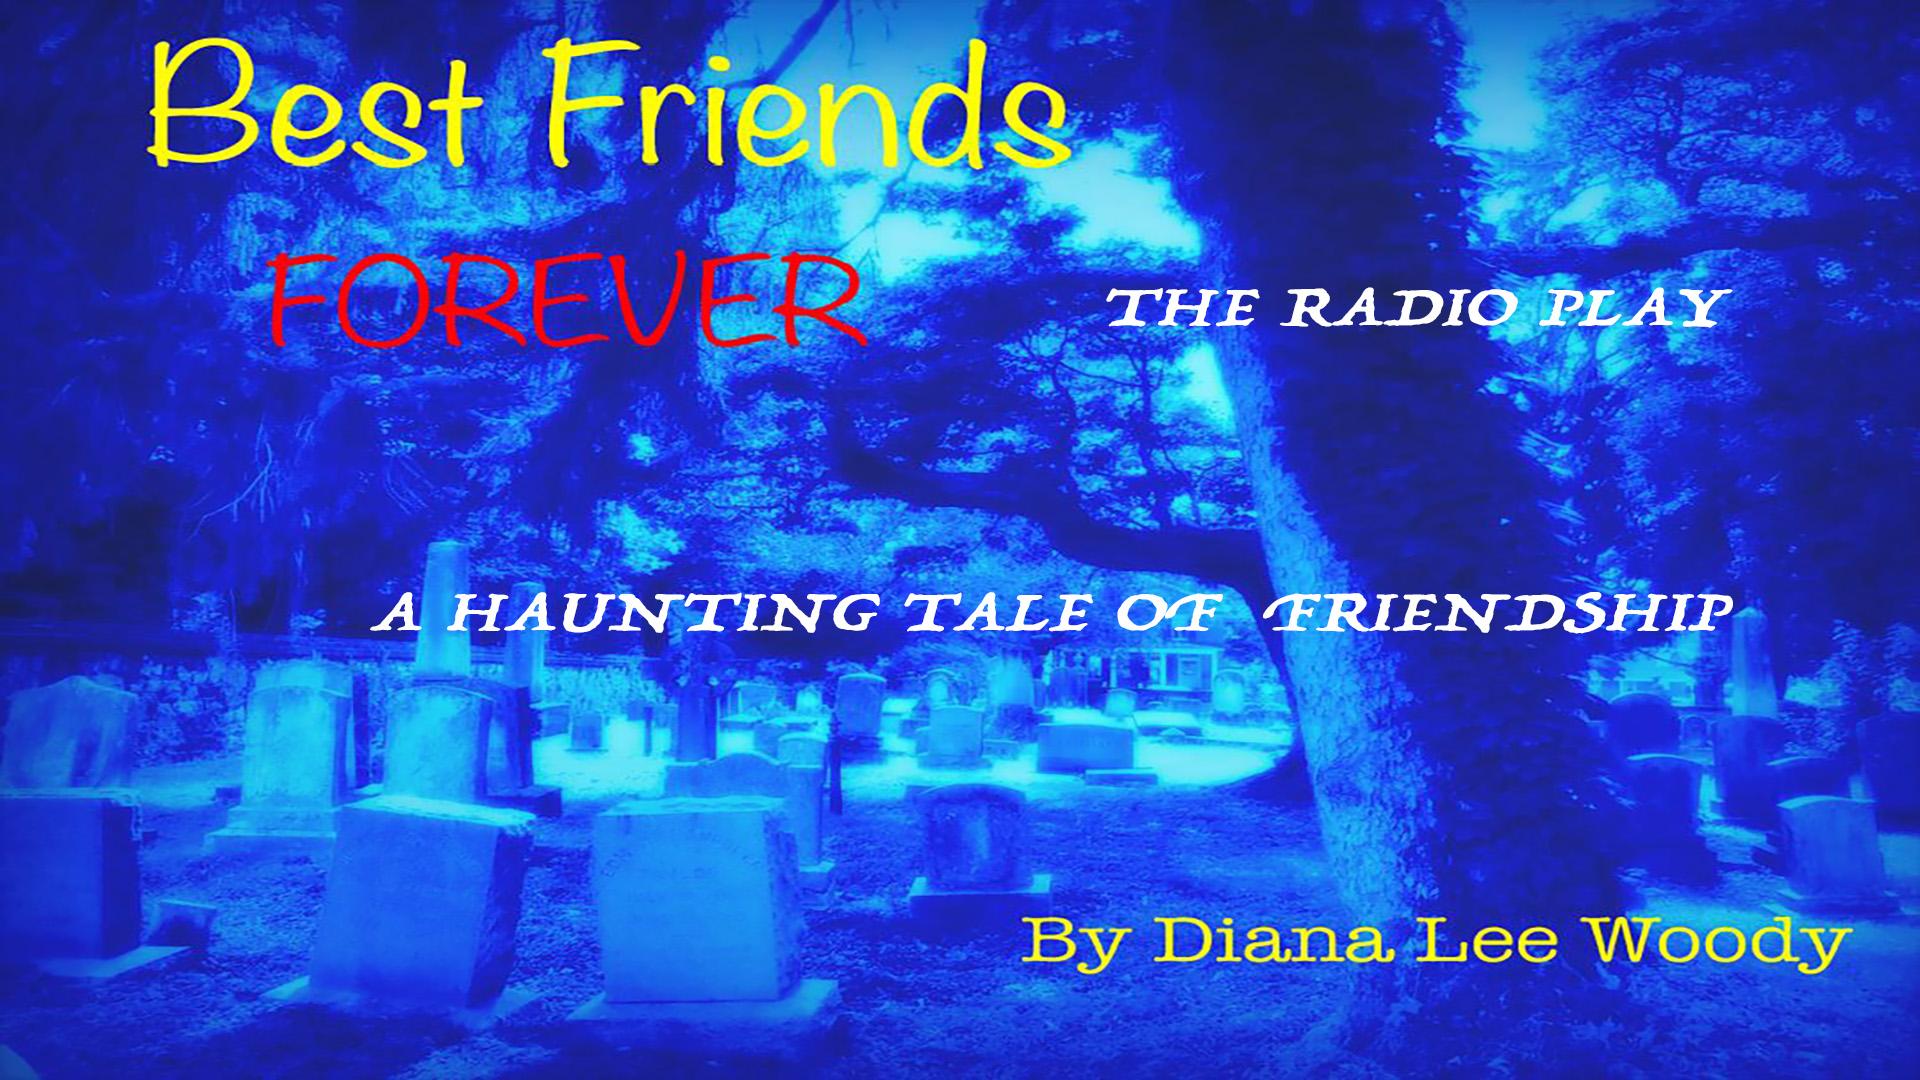 Best Friends Forever  The Radio Play